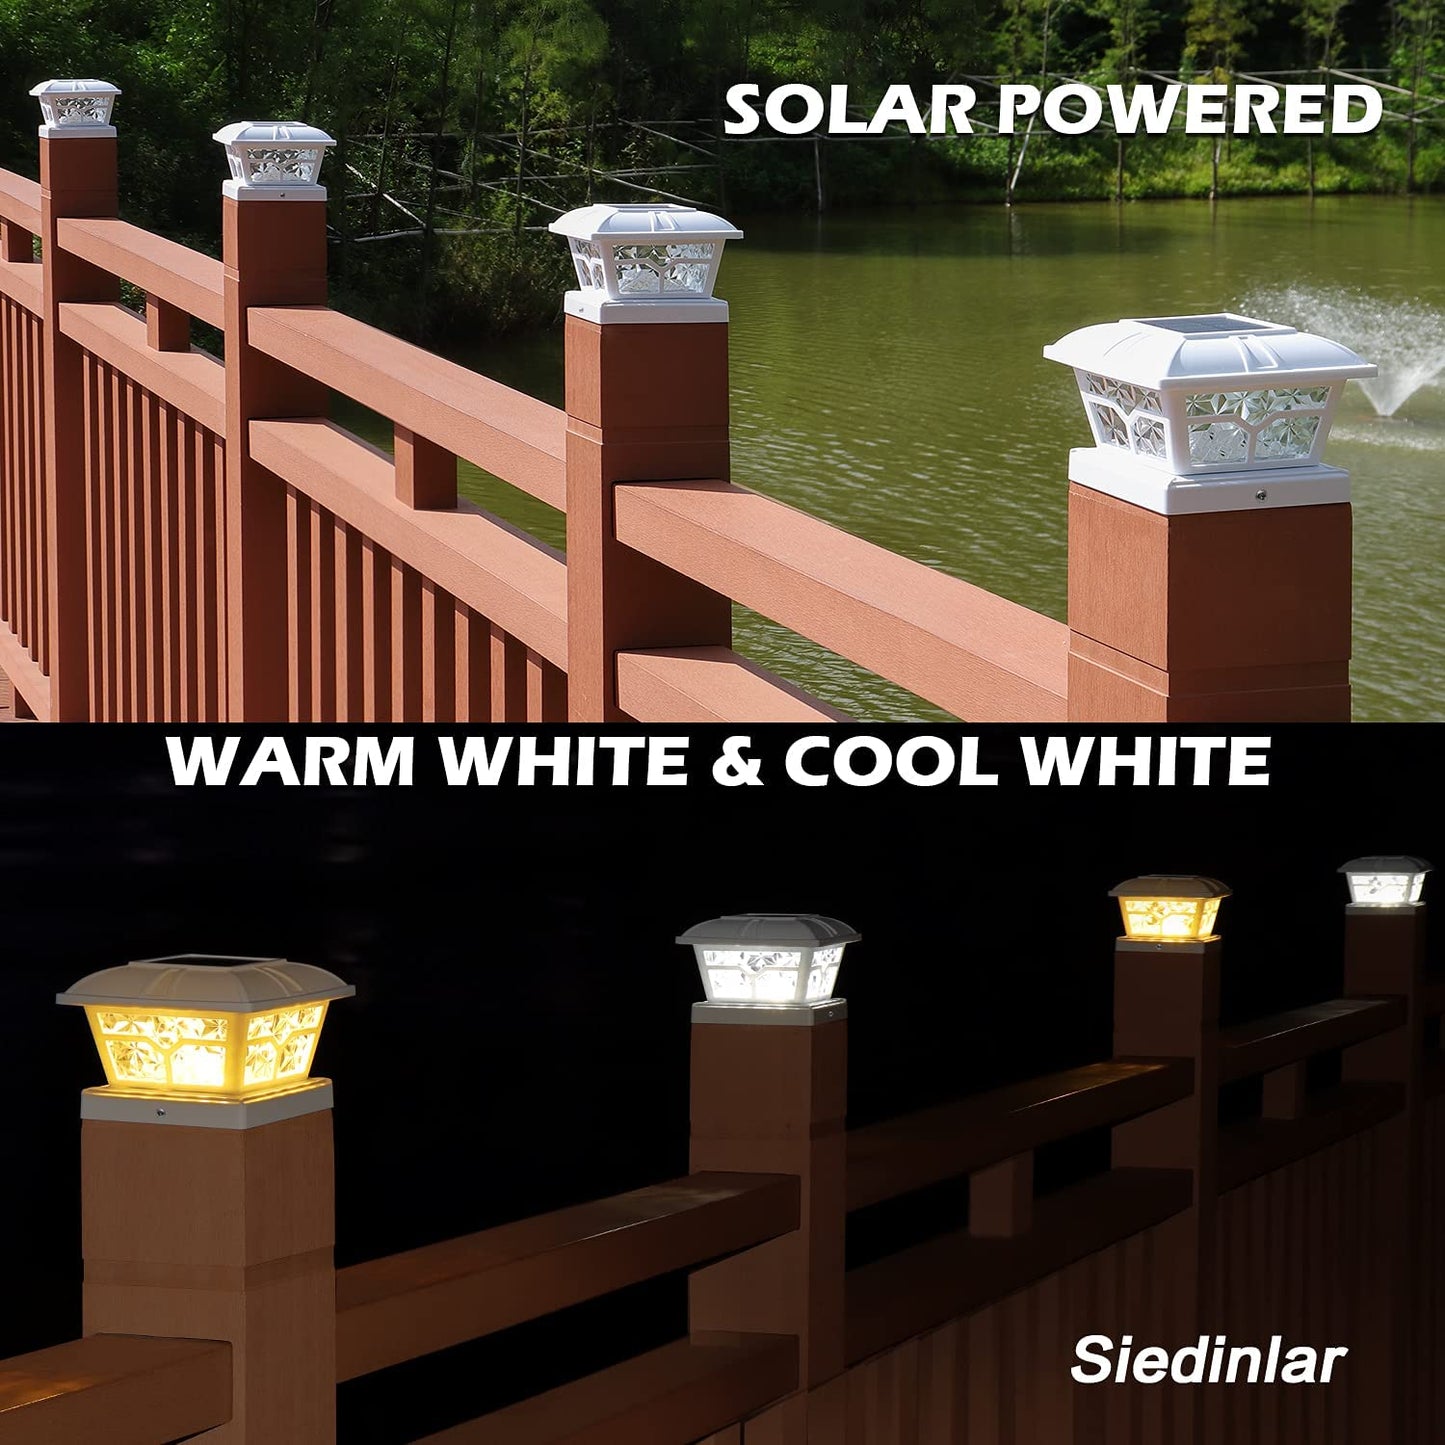 Siedinlar SD020 Solar Post Cap Lights Outdoor 2 Color Modes 8 LEDs for 4x4 5x5 6x6 Posts Fence Deck Patio Decoration Warm White & Cool White Lighting White